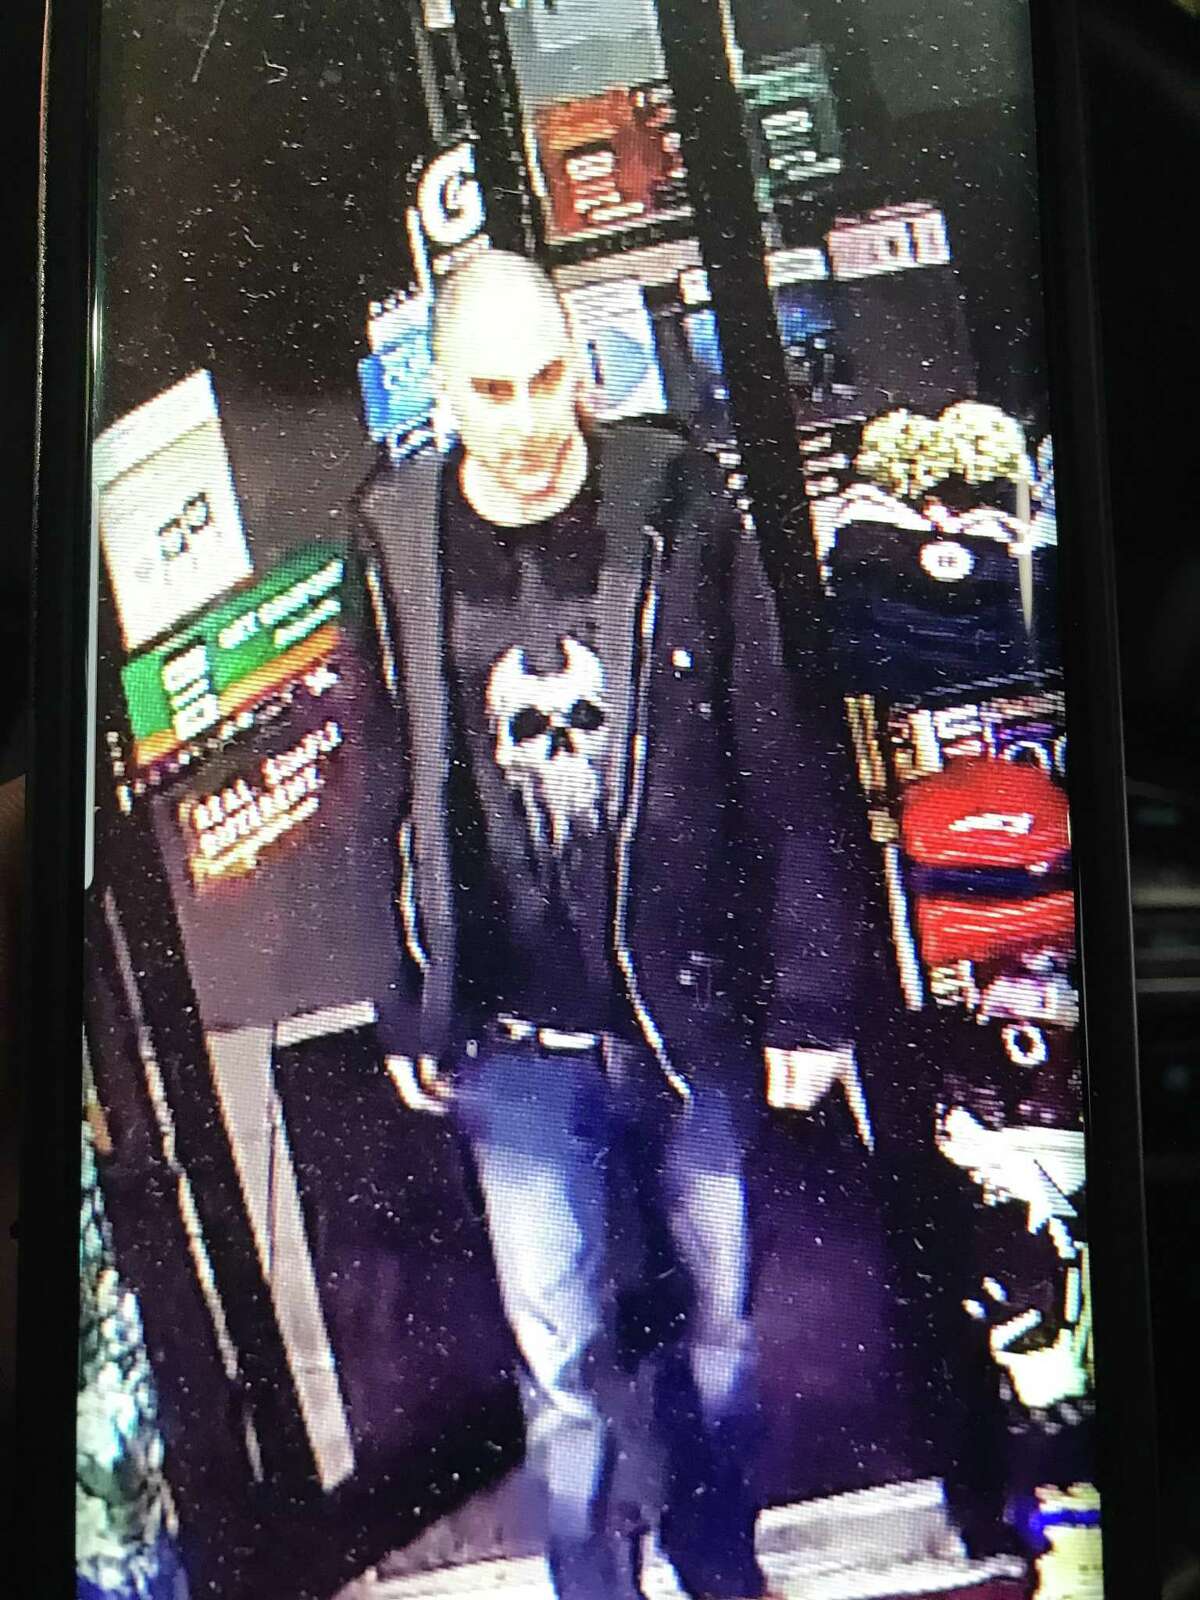 Hamden police are looking for a man accused of stealing a carton of cigarettes from Krauszer's Food Store.